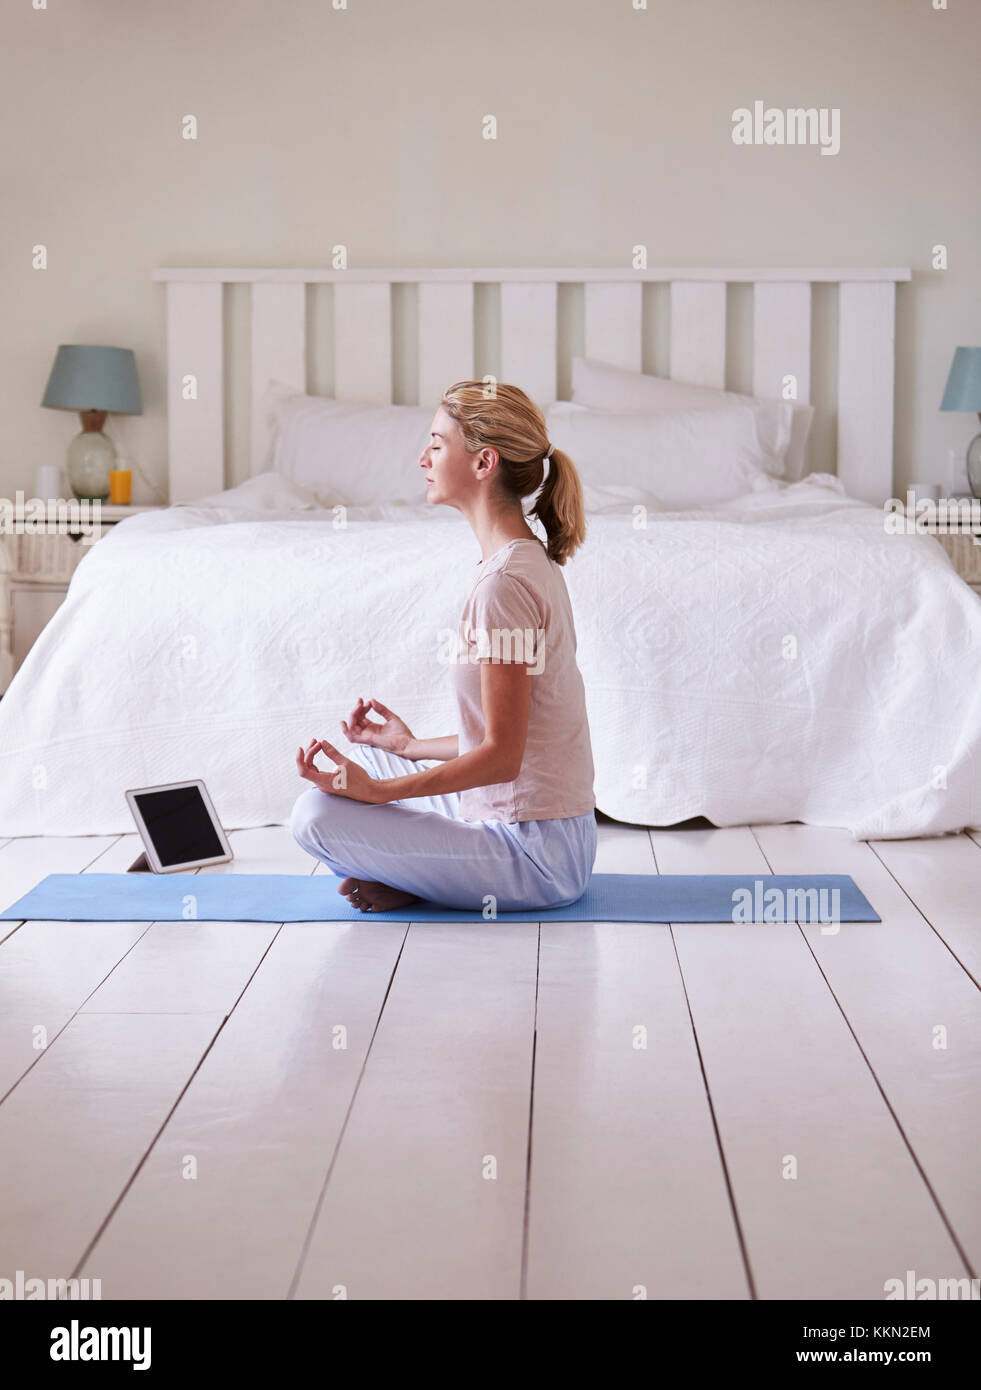 Woman With Digital Tablet Using Meditation App In Bedroom Stock Photo